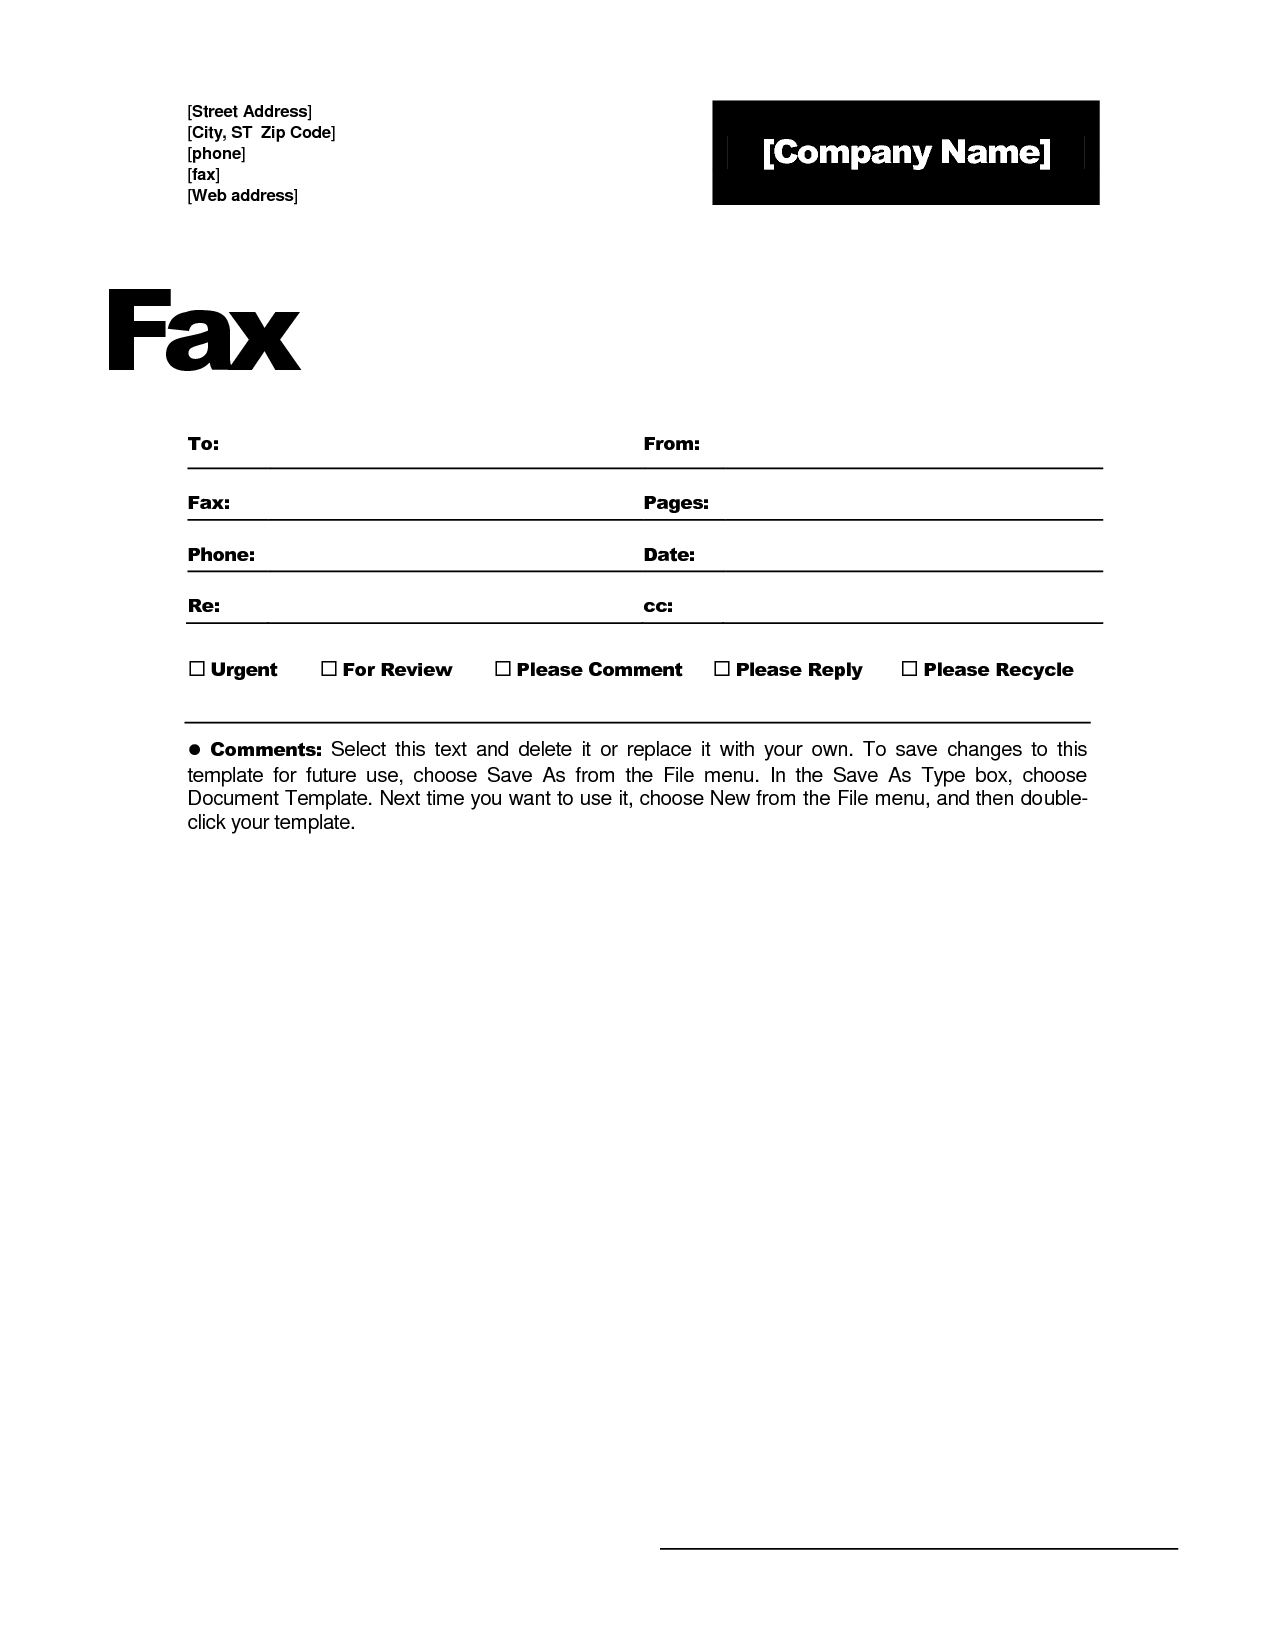 Free Fax Cover Sheet Template With Confidentiality Statement Word regarding Fax Cover Sheet Template Word 2010